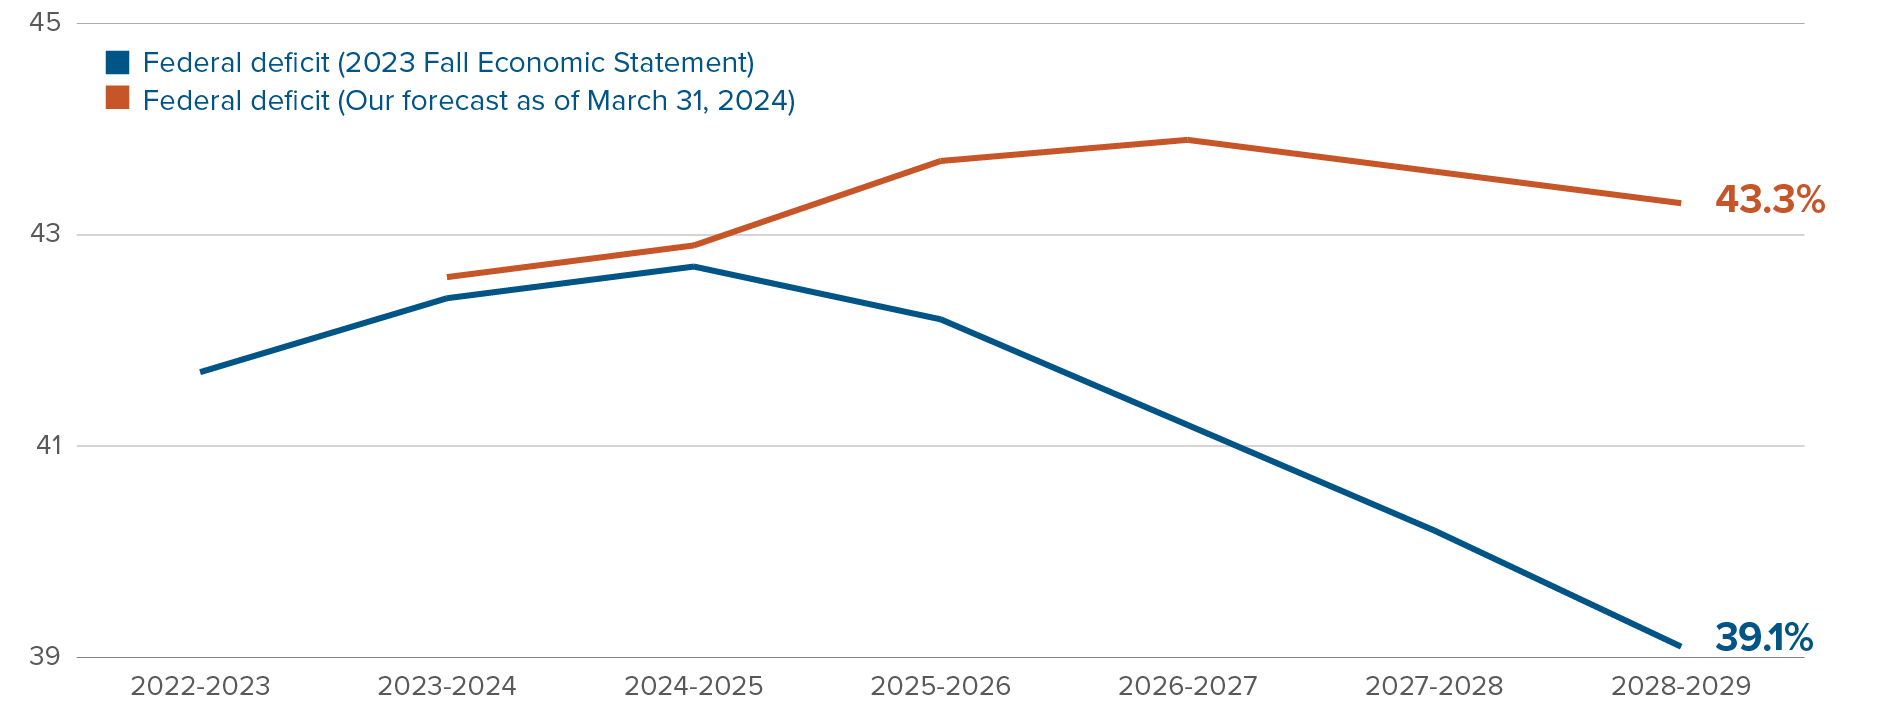 Chart: Federal government debt-to-GDP ratio is expected to hit 44% in 2026-27, declining slightly to 43.5% by 2029, much higher than the 2023 fall economic statement goal of 39% by 2029.